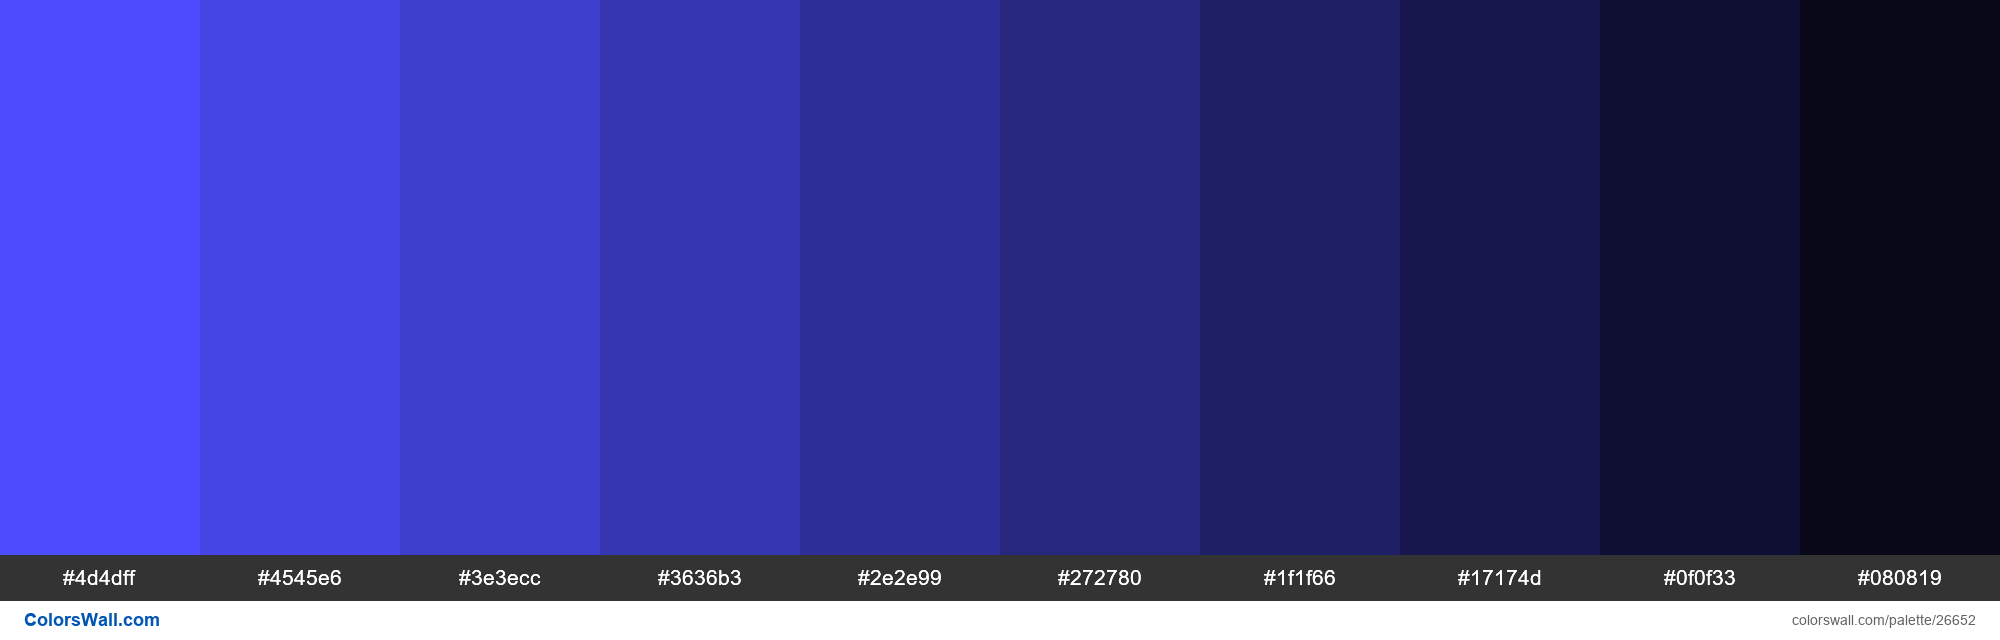 Shades of Neon Blue color #4D4DFF hex | ColorsWall